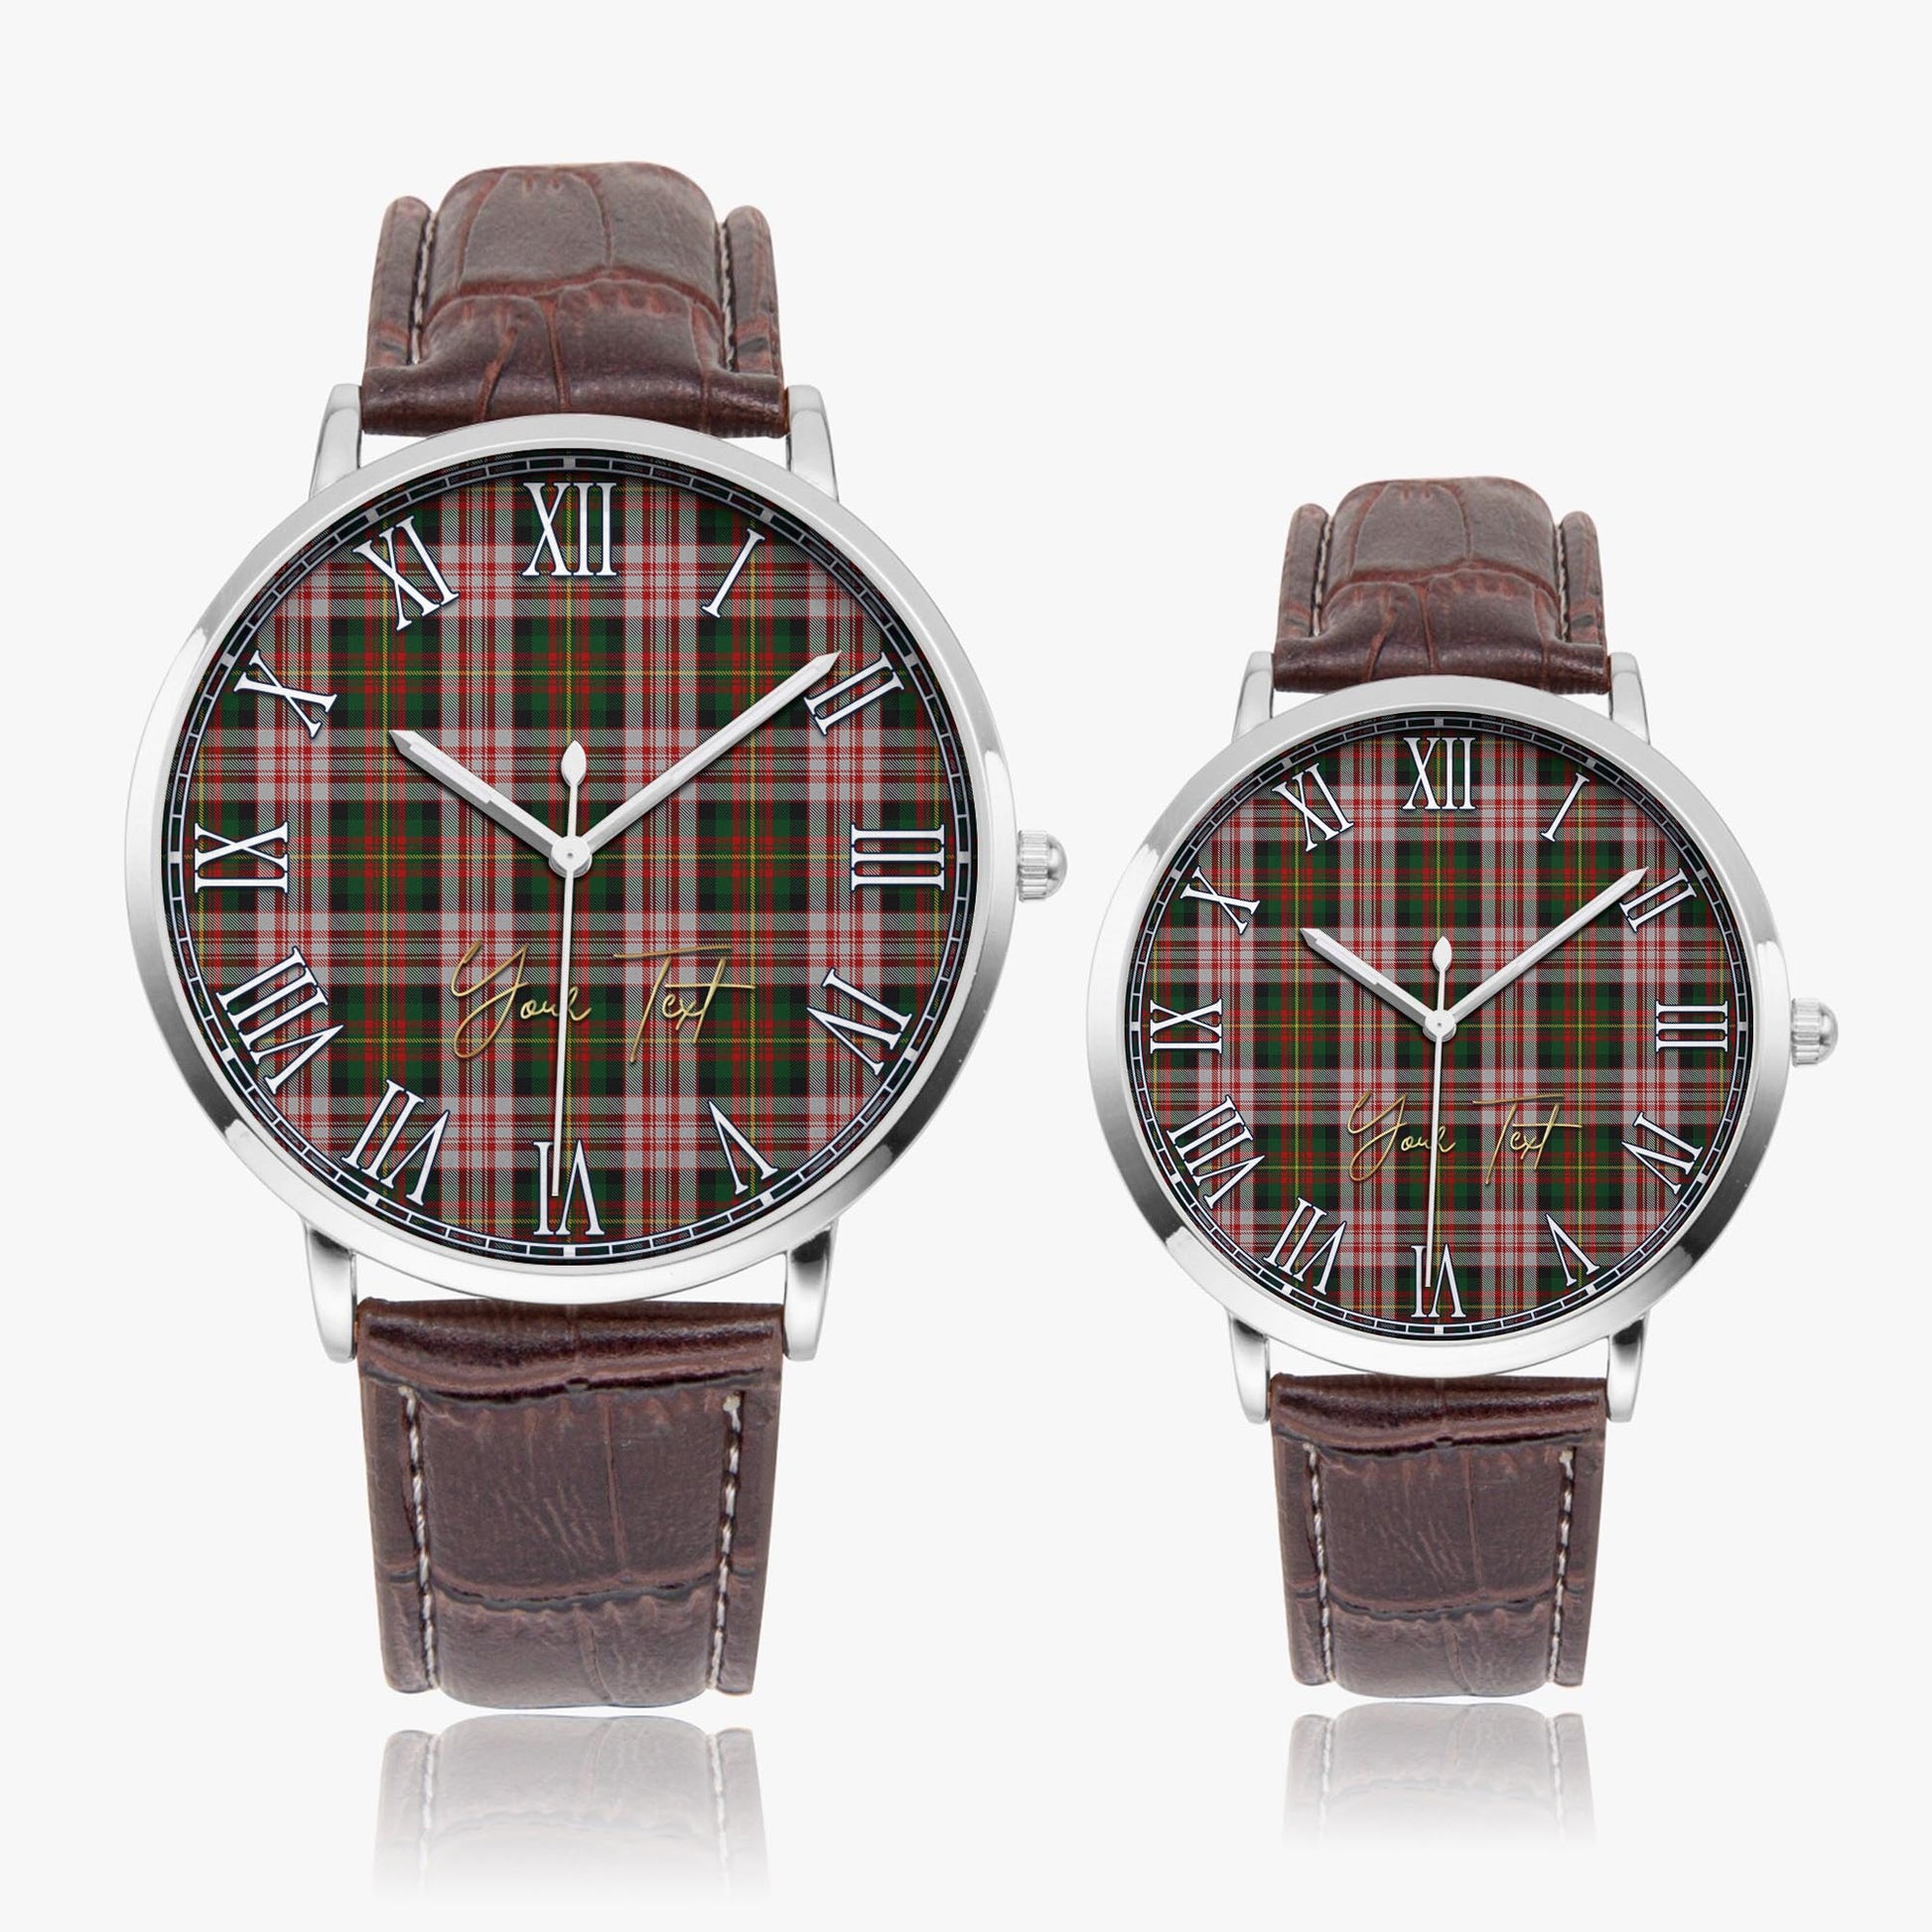 Carnegie Dress Tartan Personalized Your Text Leather Trap Quartz Watch Ultra Thin Silver Case With Brown Leather Strap - Tartanvibesclothing